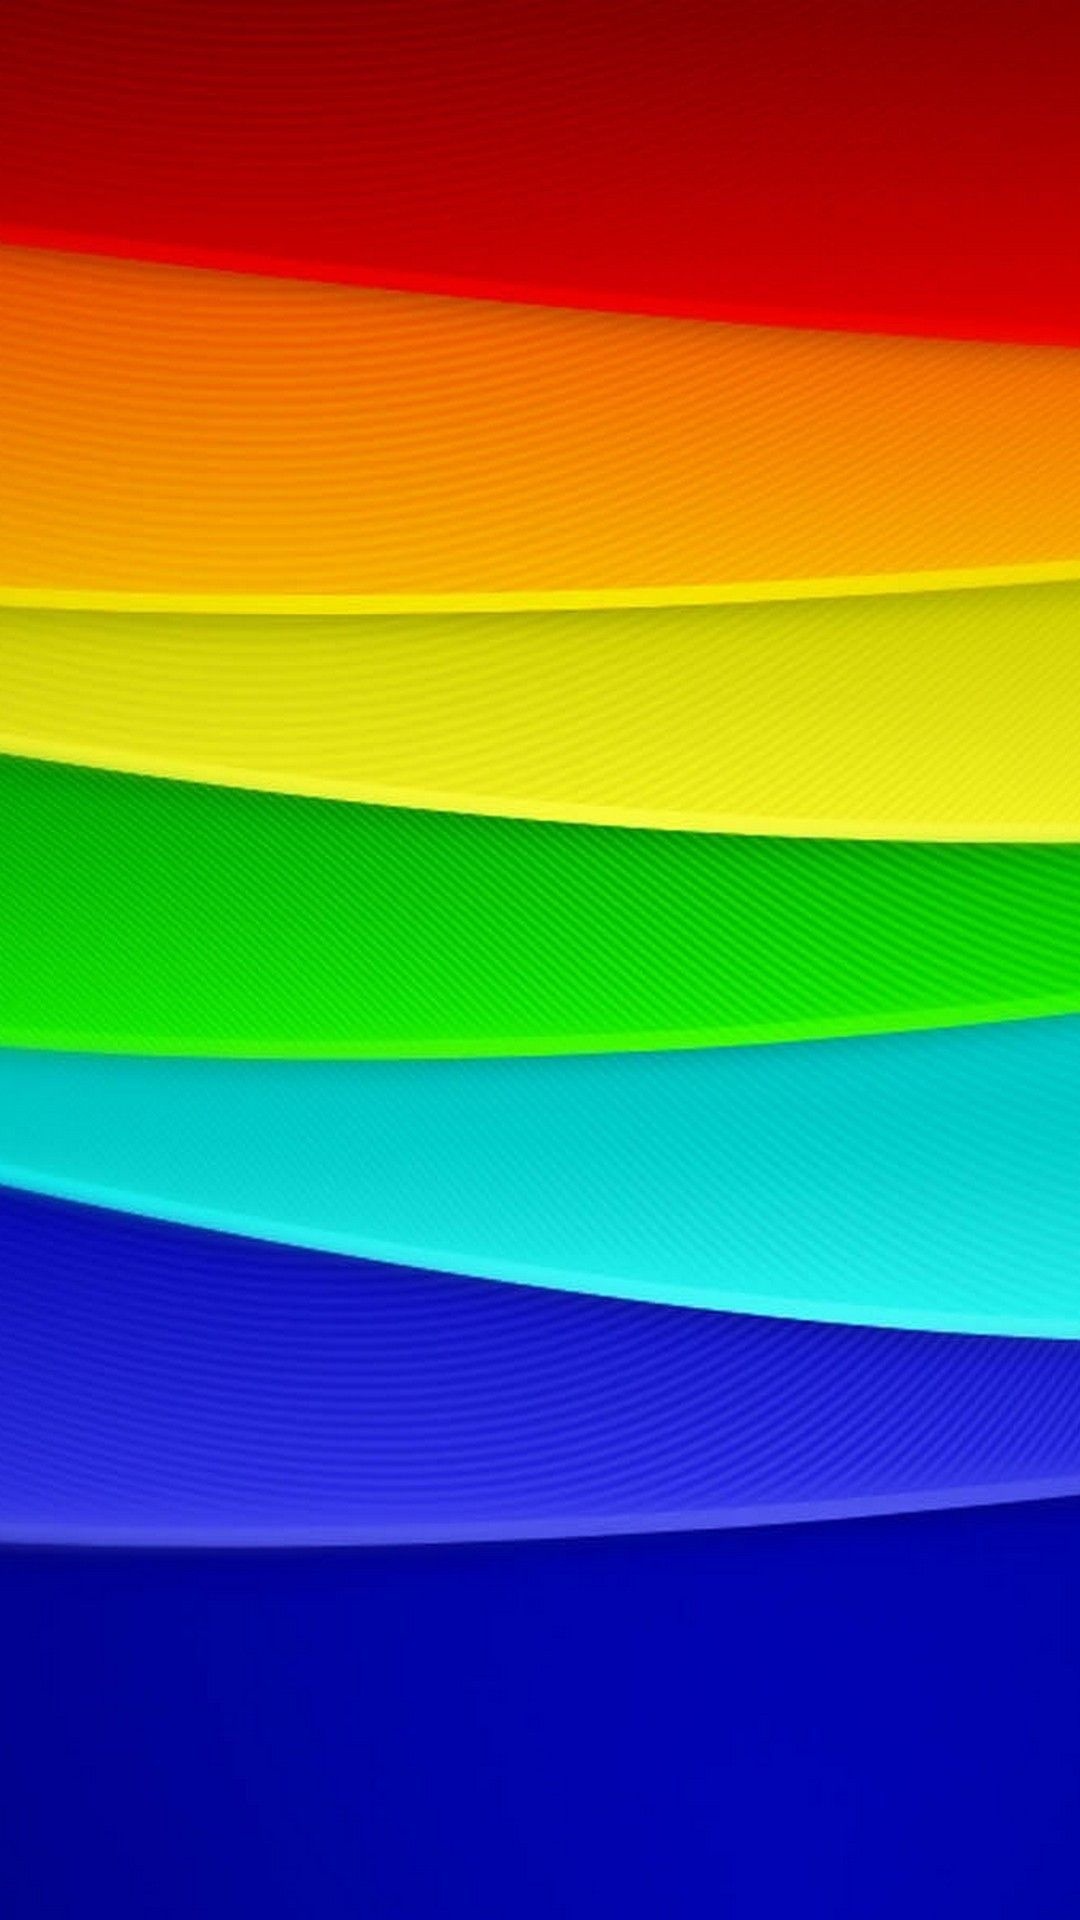 Rainbow phone wallpapers, Cool and vibrant, Colorful and eye-catching, Trendy mobile backgrounds, 1080x1920 Full HD Phone